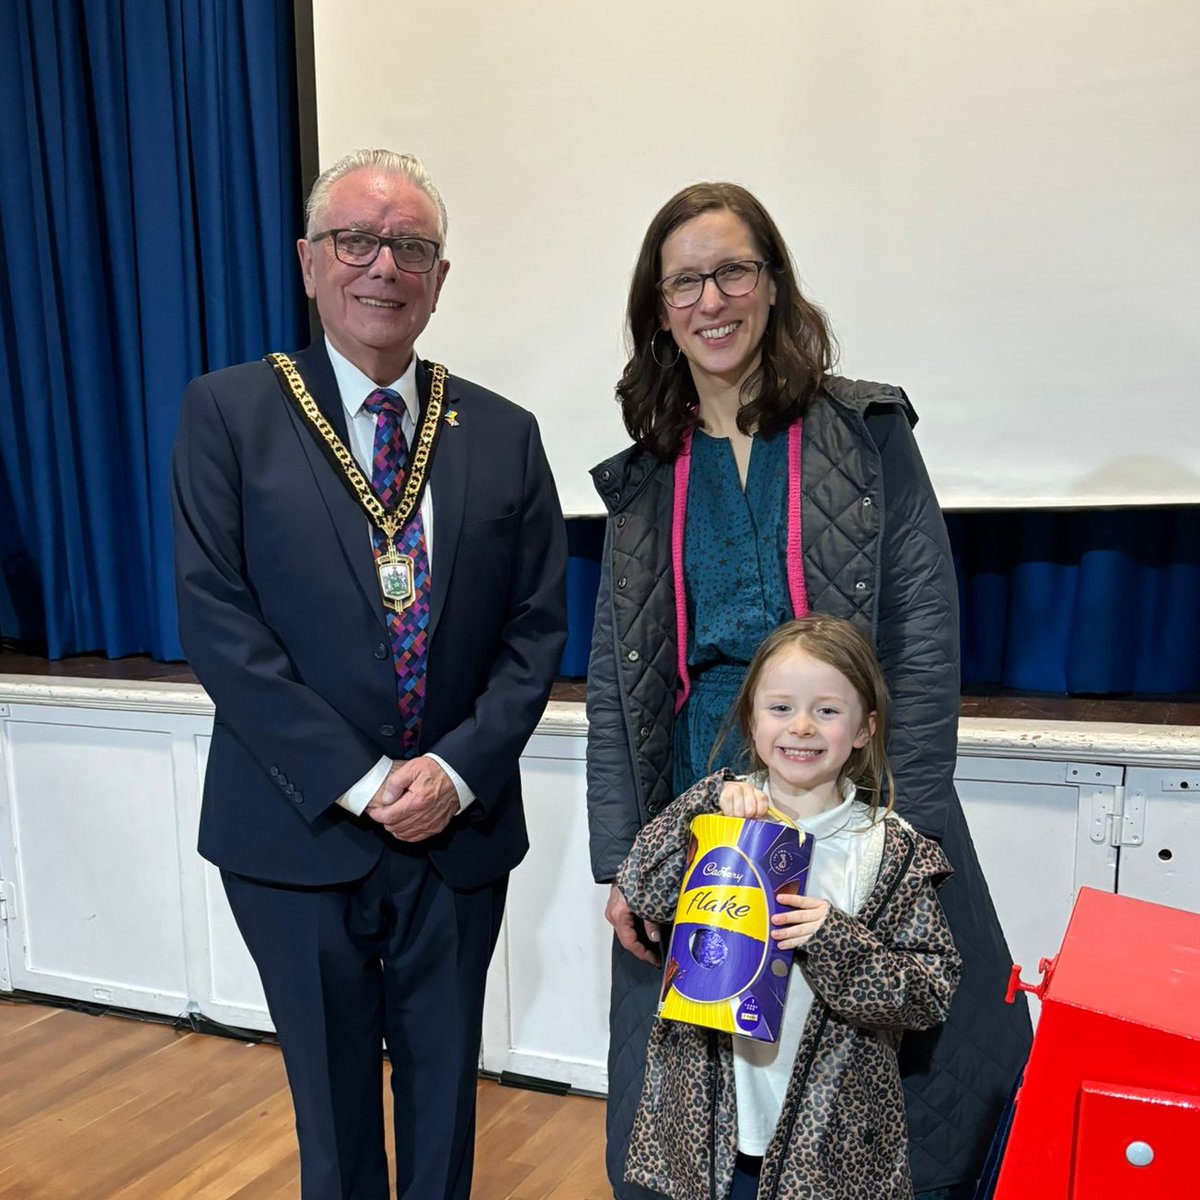 An entertaining Spring Show was hosted by the @OVFMUK, with the Deputy Mayor & Mayoress joining to view a selection of impressive films created by group members. Thanks to Jane for organising & the young resident who helped with the draw! #Chesfield #Orpington #ProudOfBromley